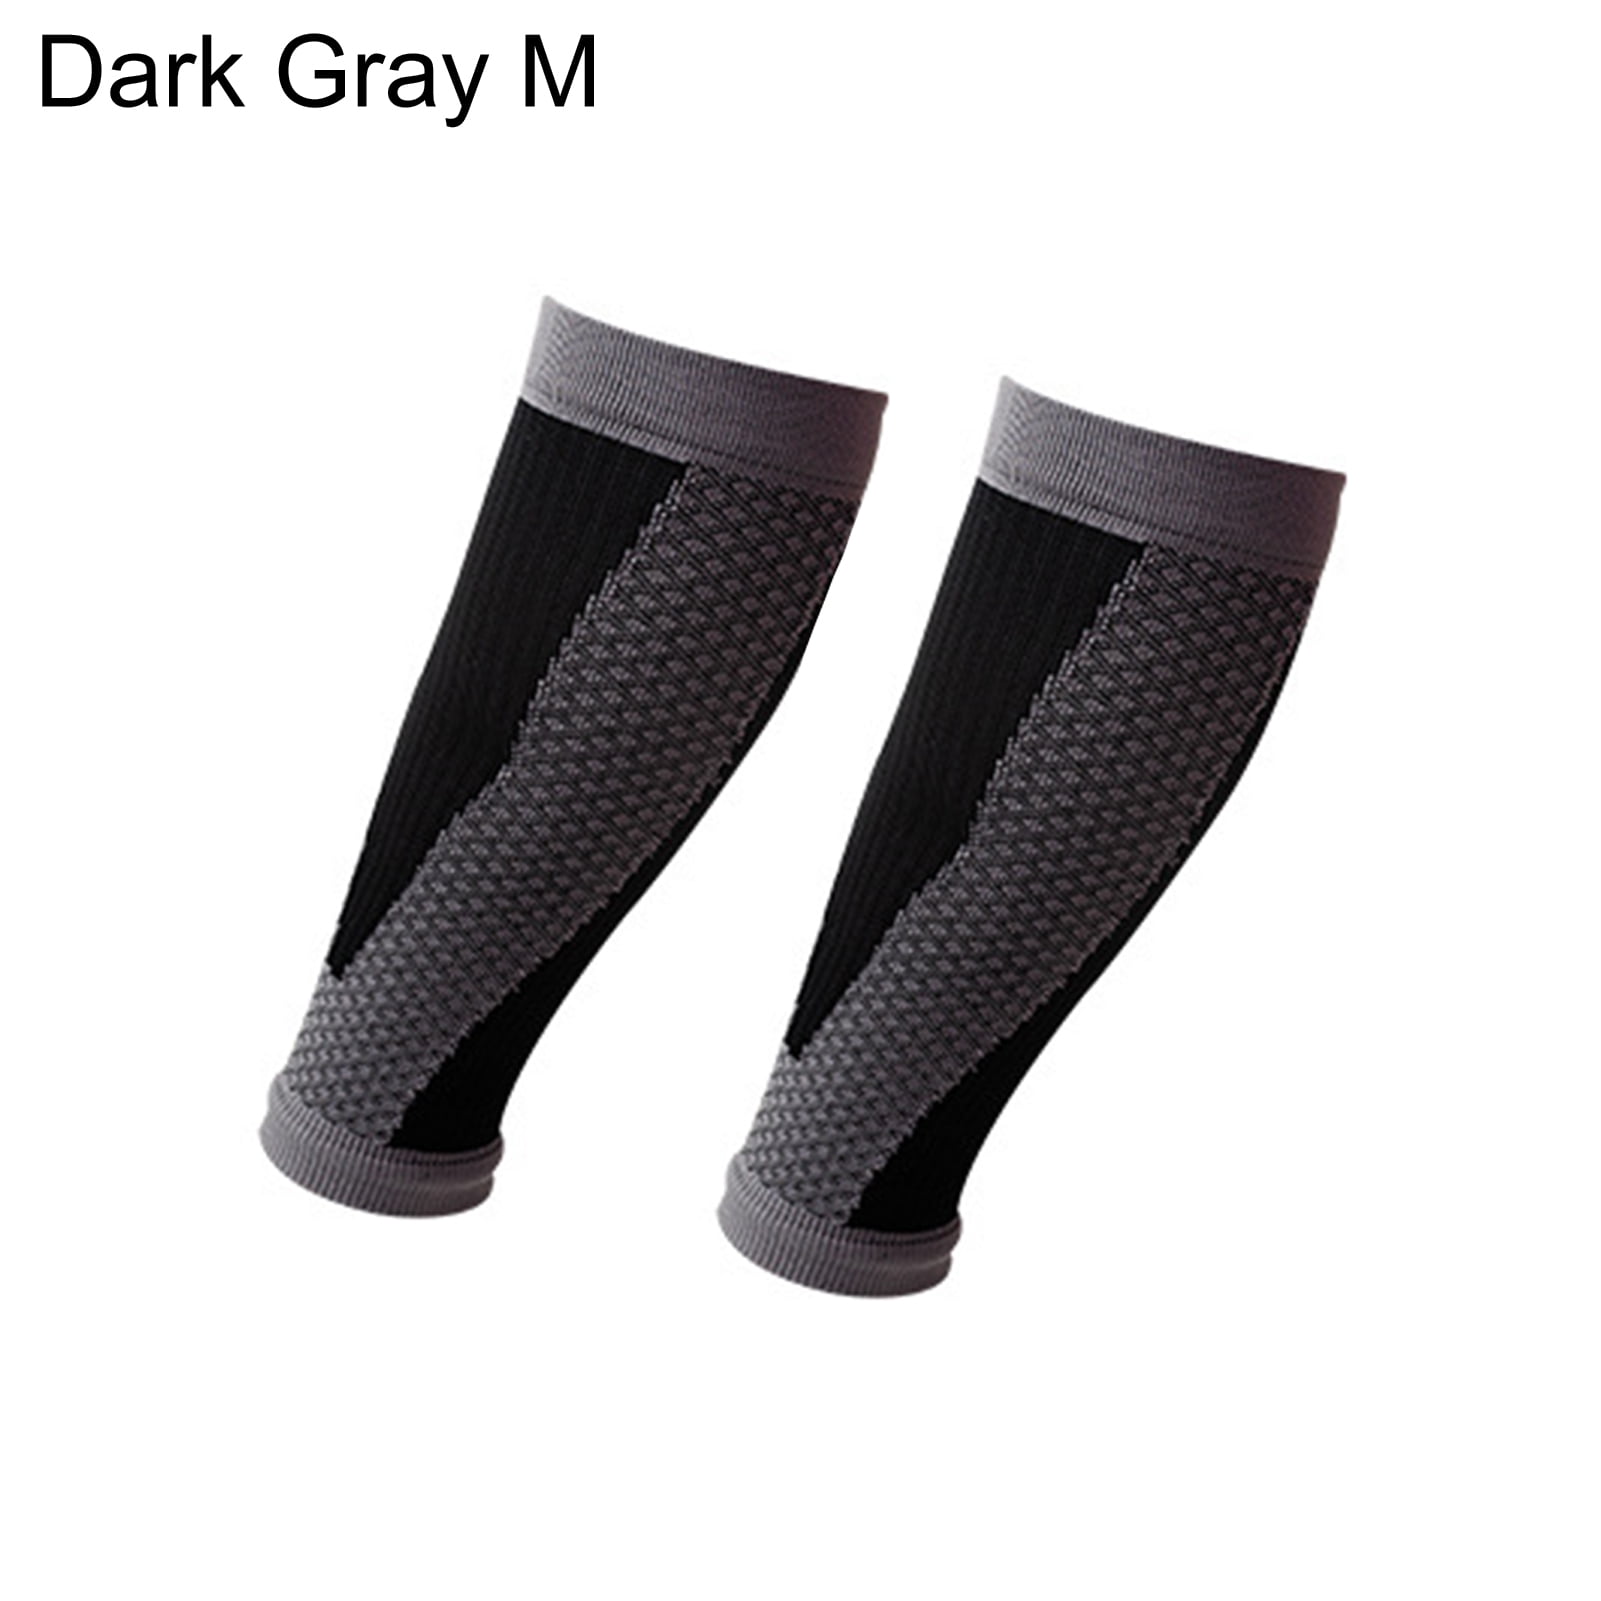 Calf Compression Sleeve for Women and Men,Leg Brace for Running, Cycling,  Shin Splint Support for Working out 